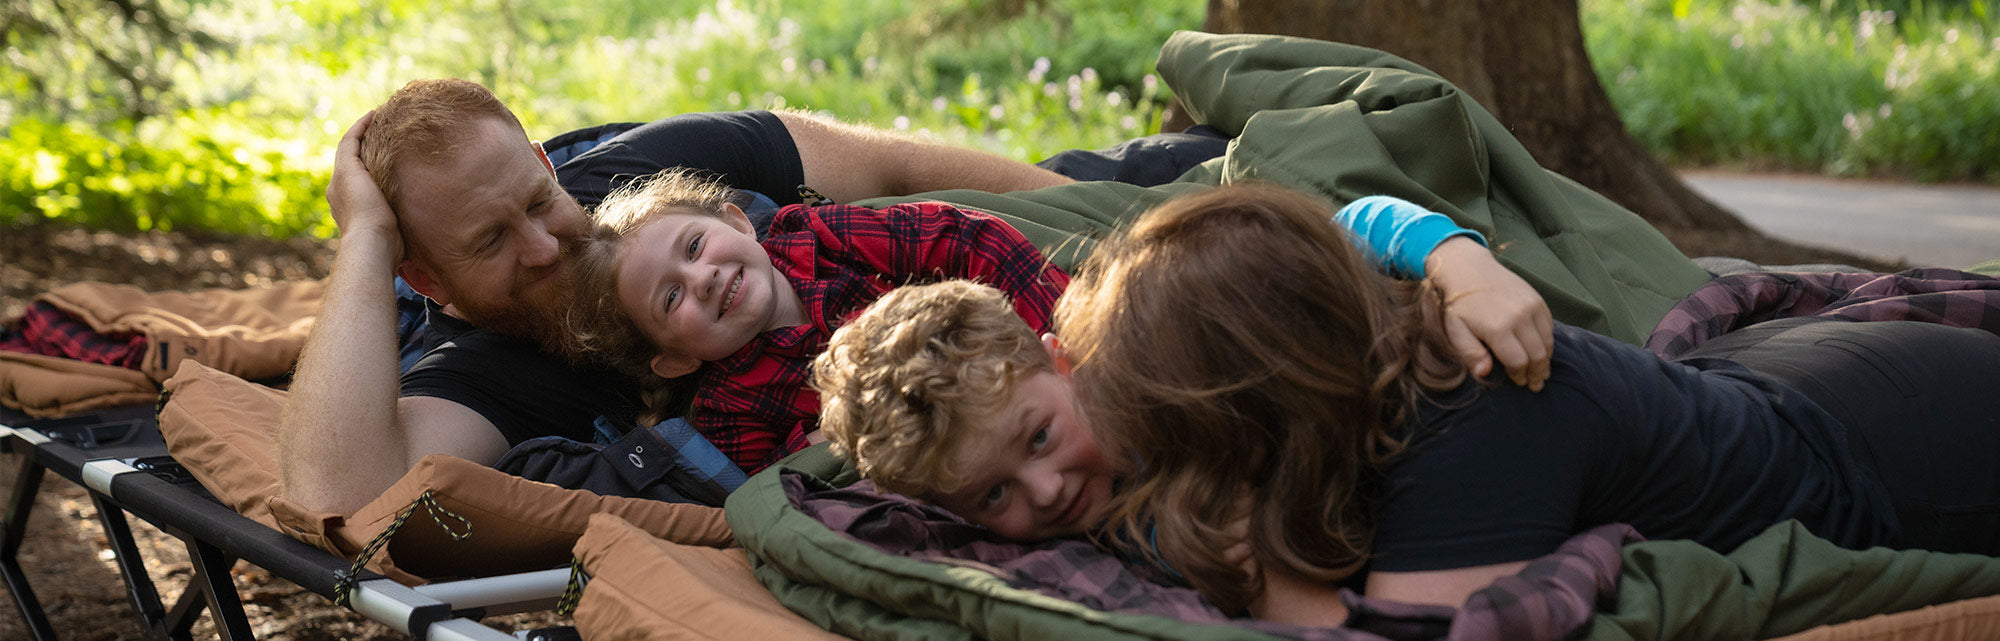 New Bridger Canvas Sleeping Bags: Image shows a family of four snuggled up in TETON Sports Bridger Canvas Sleeping Bags. There are two adults and two children and they are lying on TETON cots and sleeping pads.